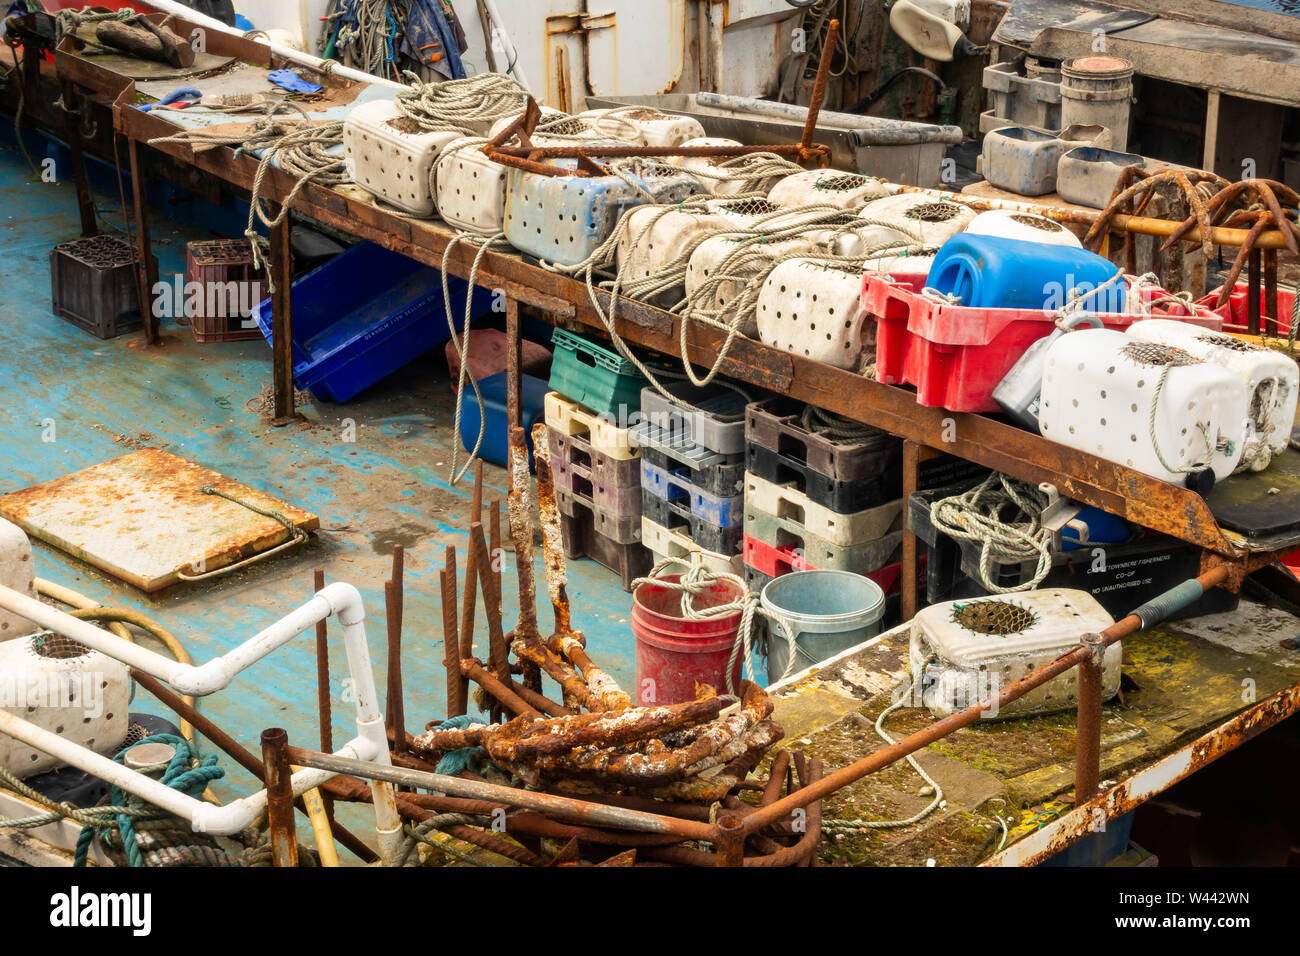 Fishing boats at Arklow in Ireland Stock Photo